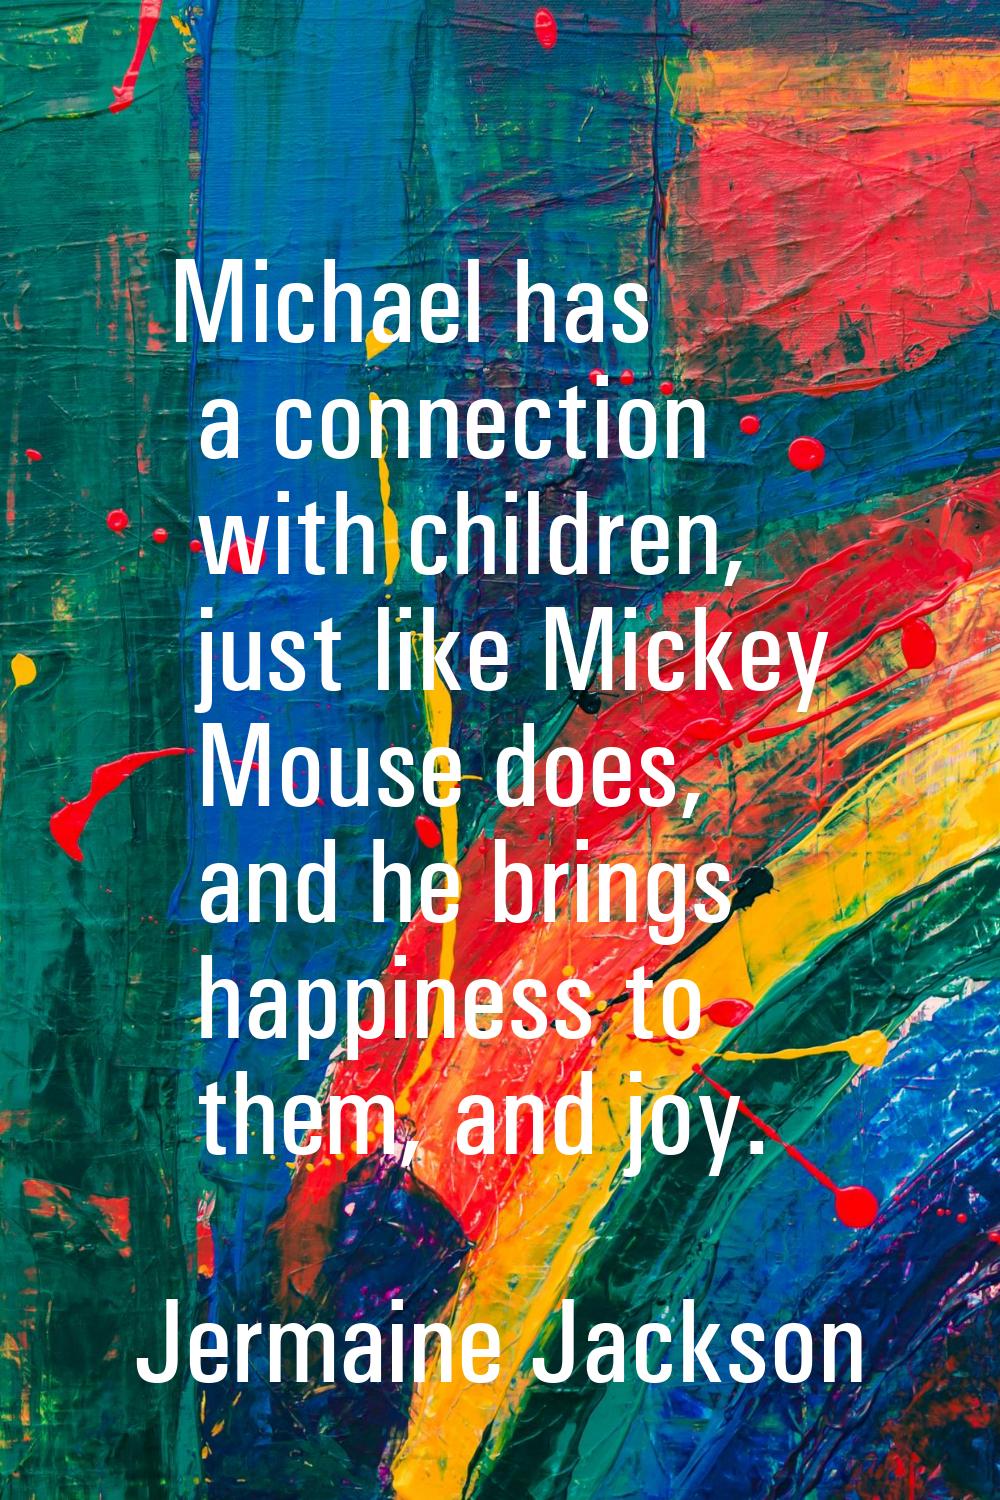 Michael has a connection with children, just like Mickey Mouse does, and he brings happiness to the